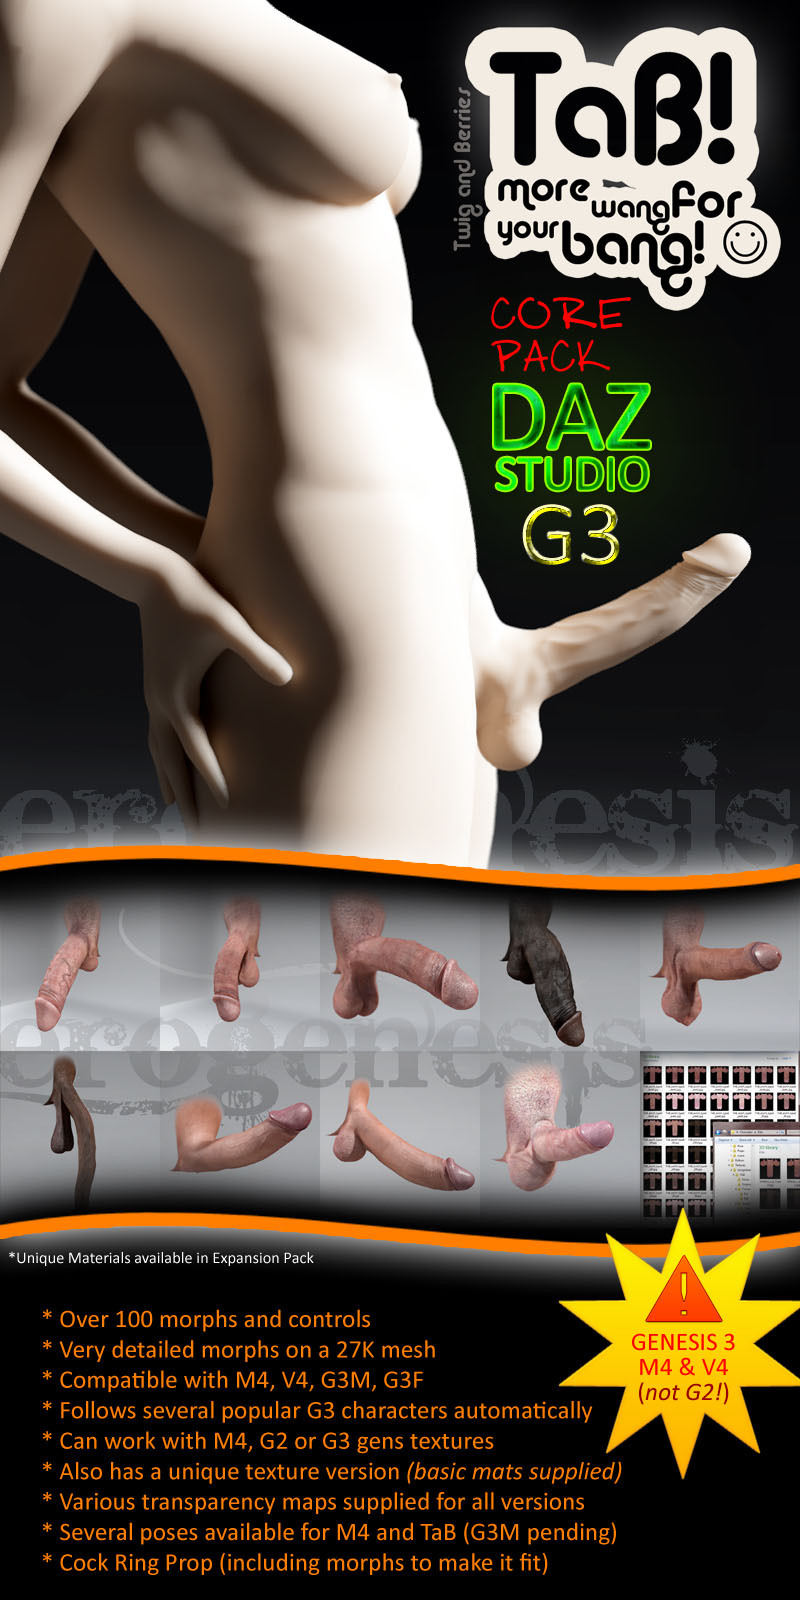  TaB (Twig and Berries) DAZ Studio G3 version, is a highly detailed male genital